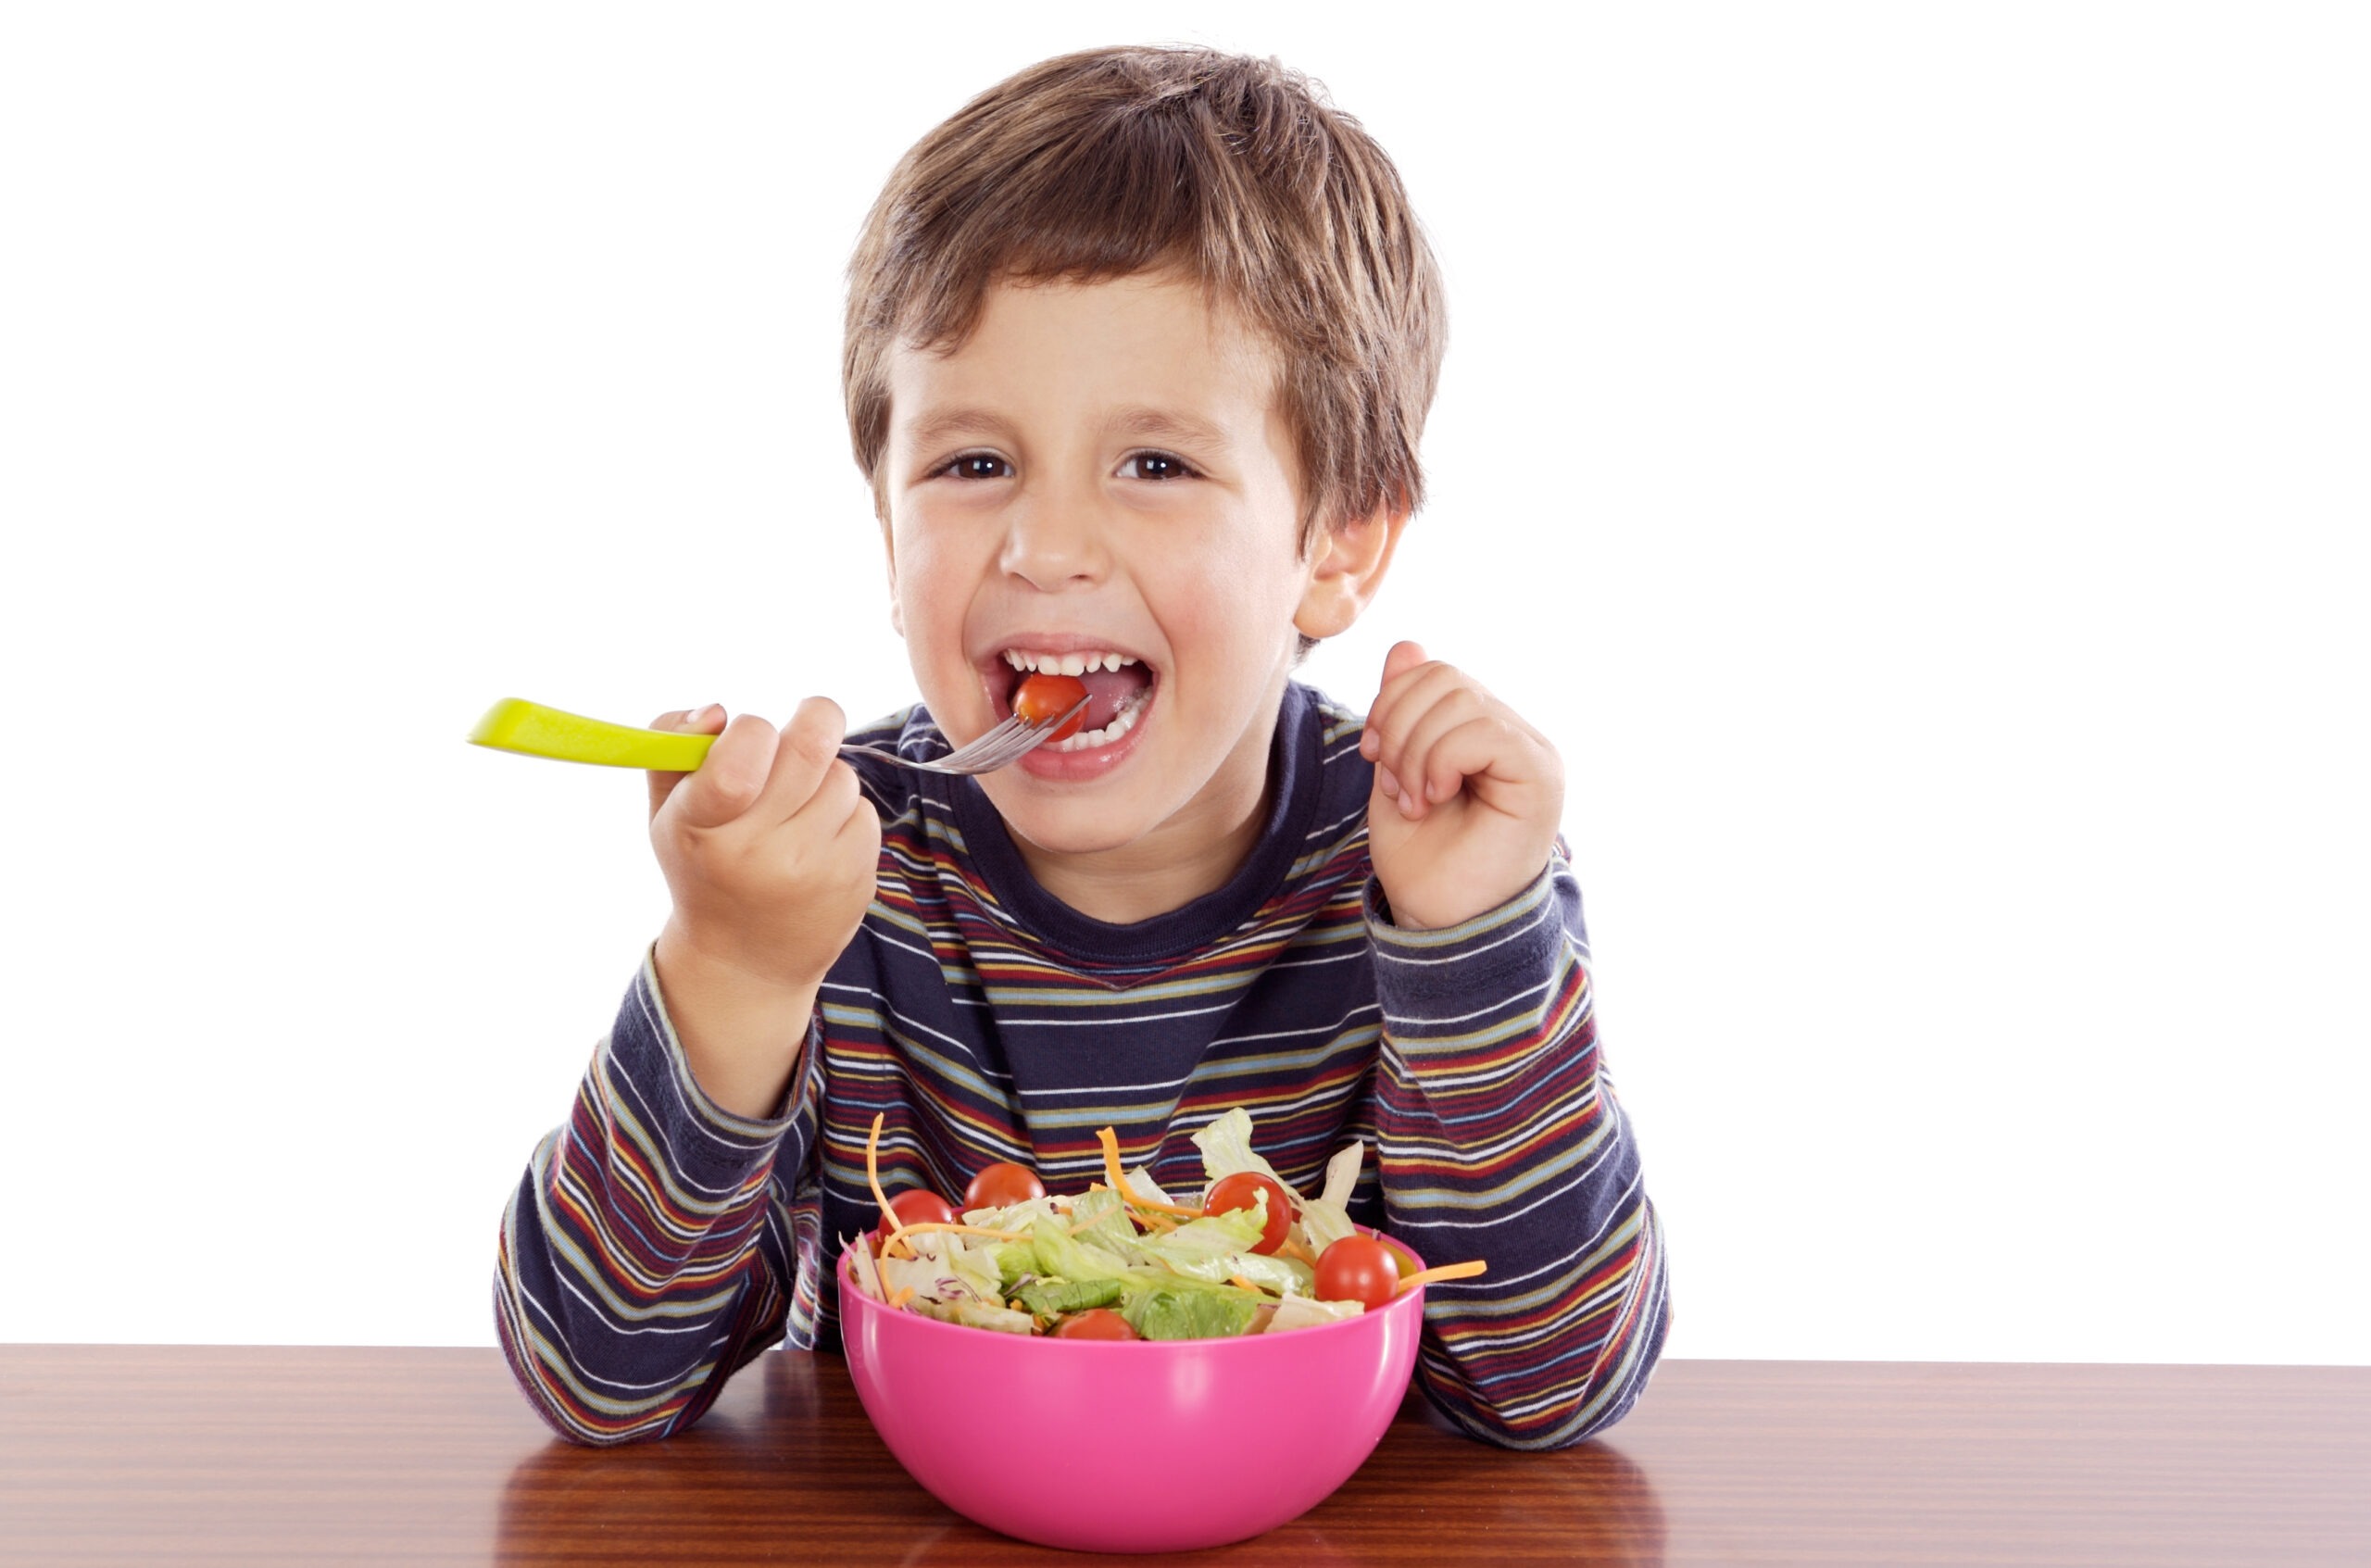 Pointers for Parenting a Picky Eater